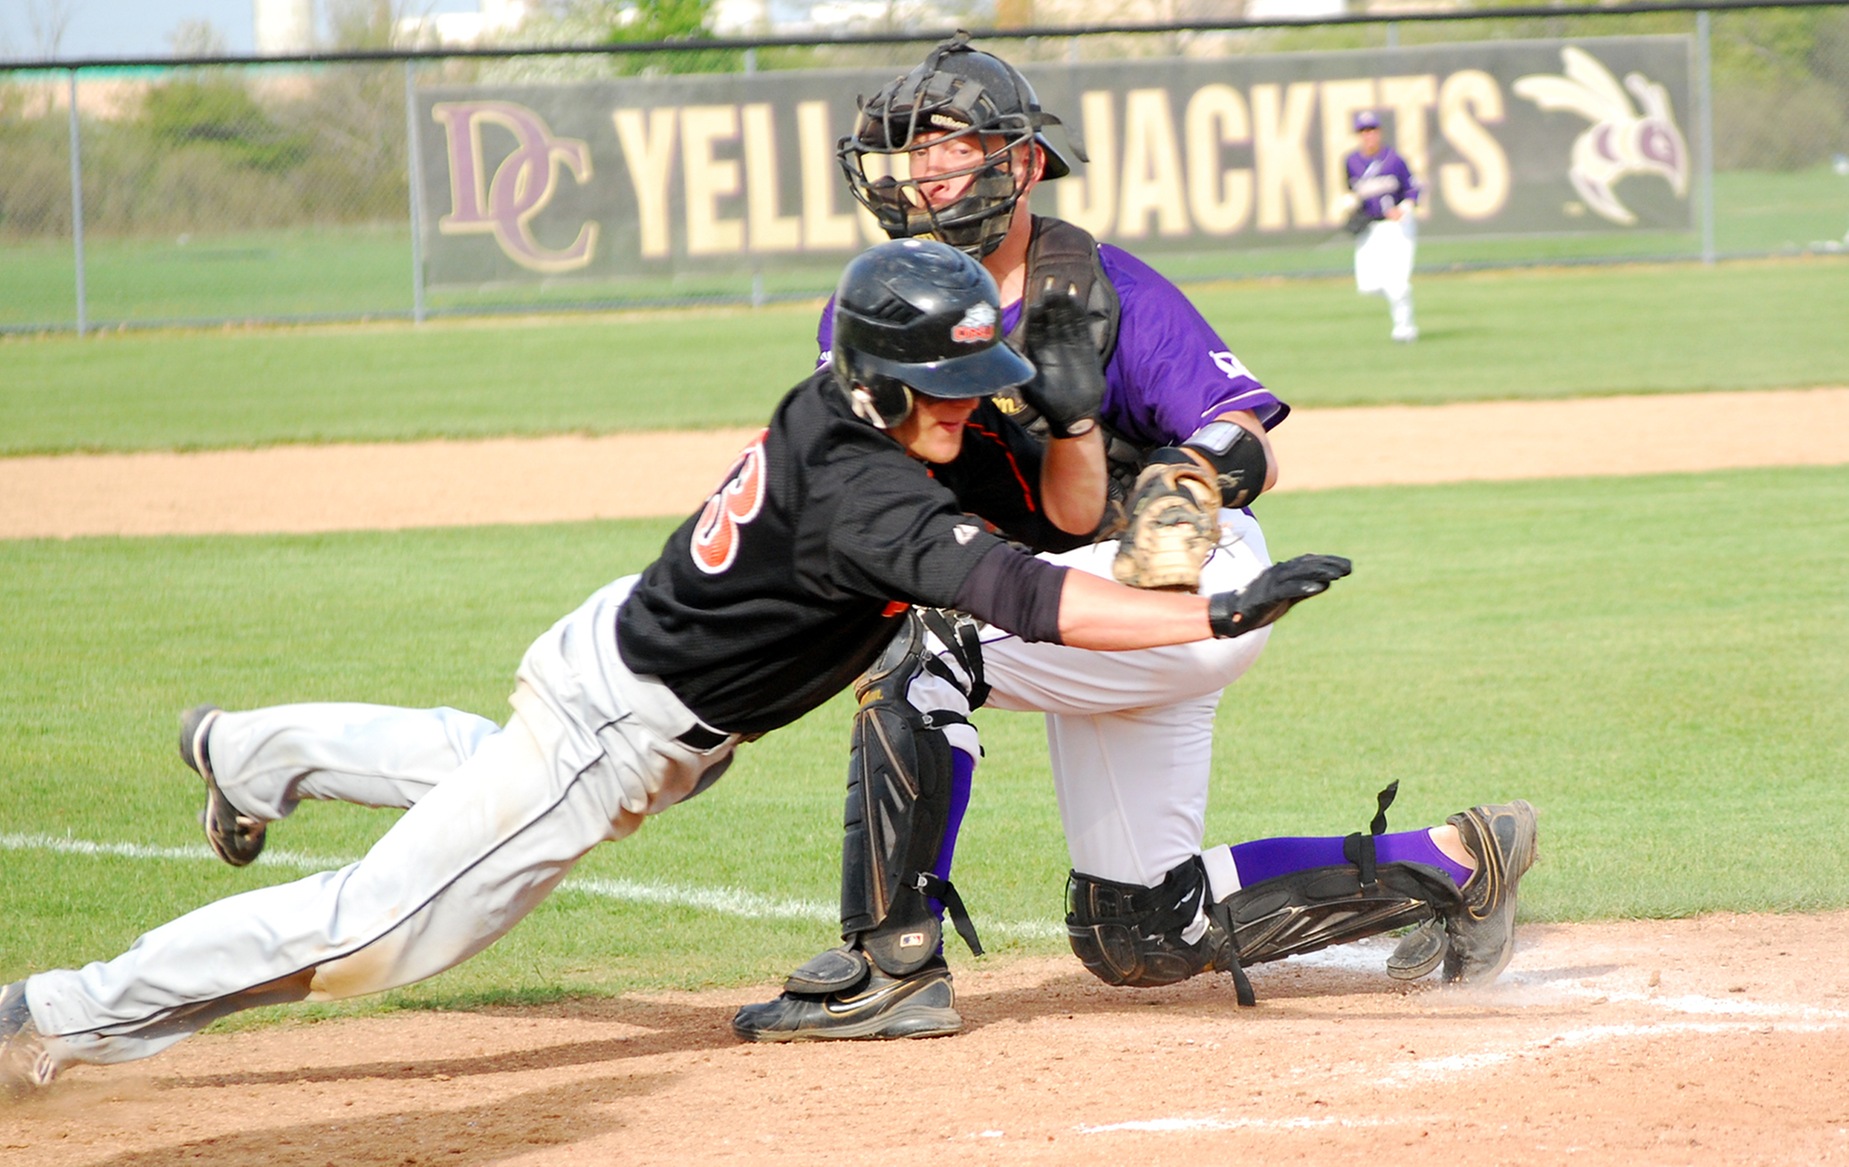 DC Comes Up Short to Ohio Northern on the Diamond